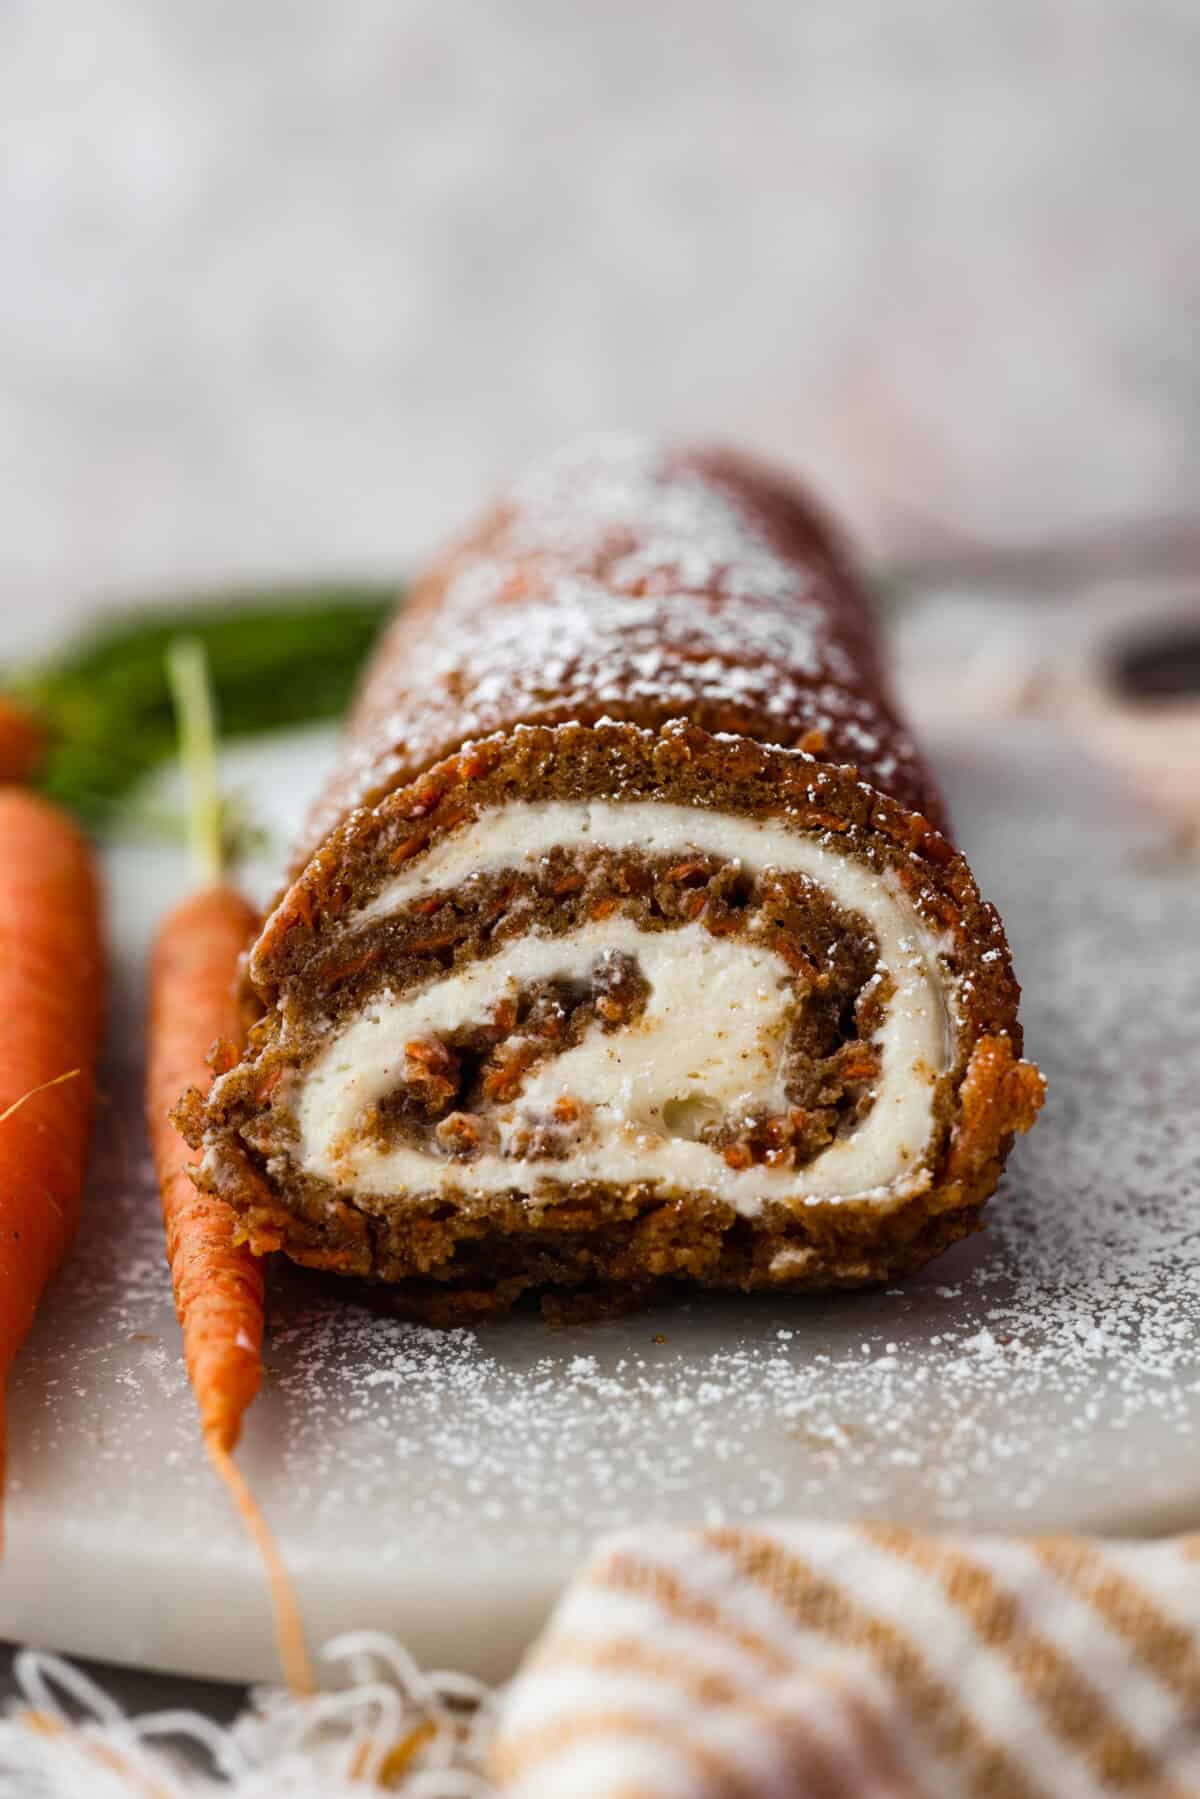 Front view of a carrot cake roll cut into slices.